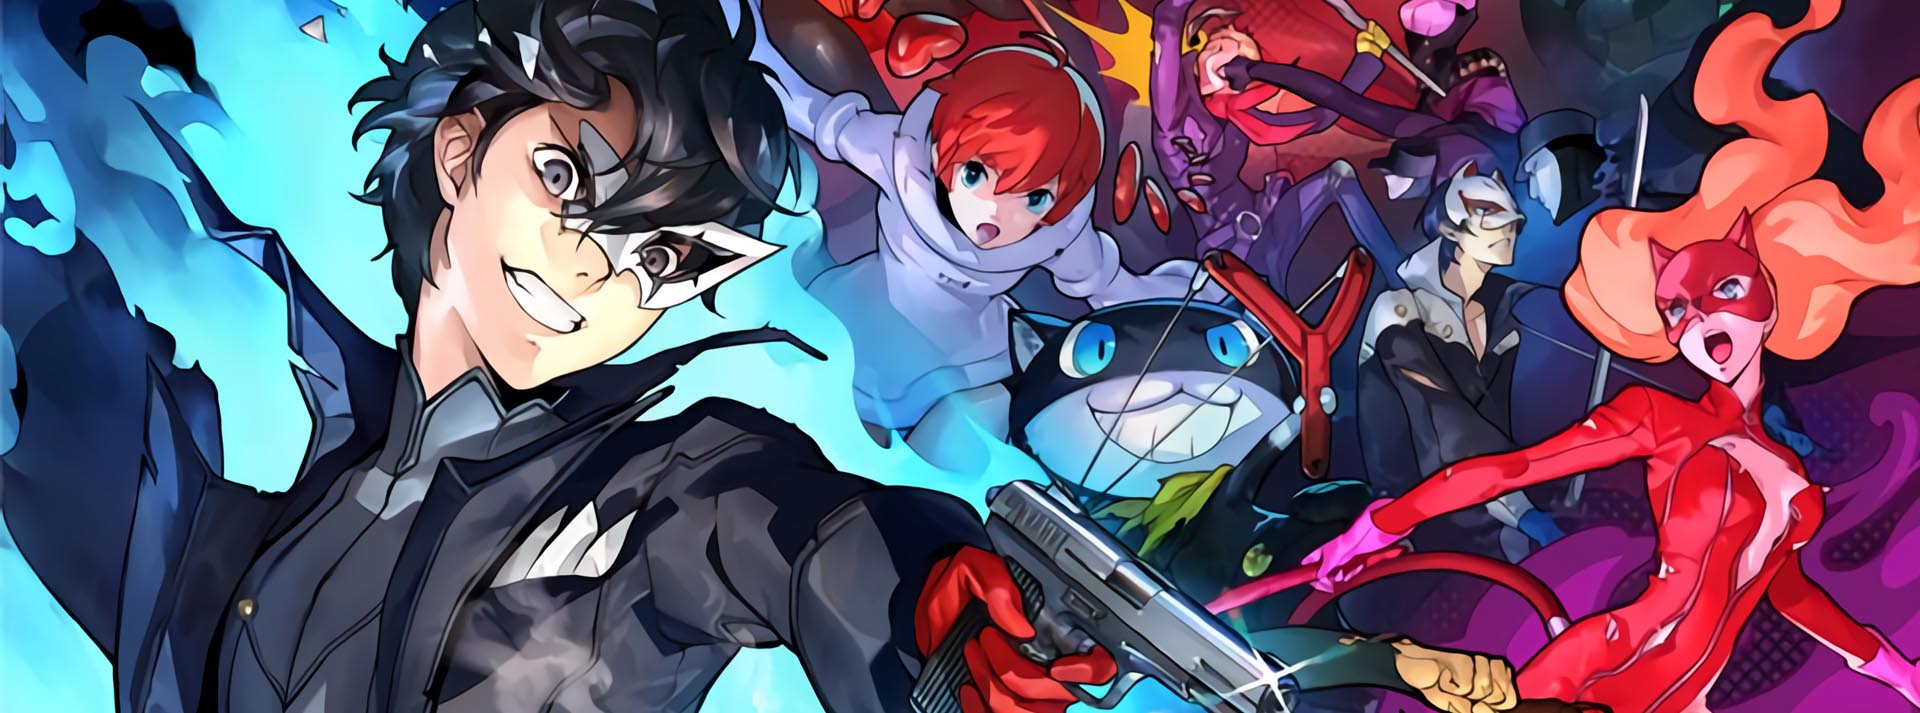 AU Deal Alert: Pre-Order Persona 5 Strikers For PS4 Or Switch